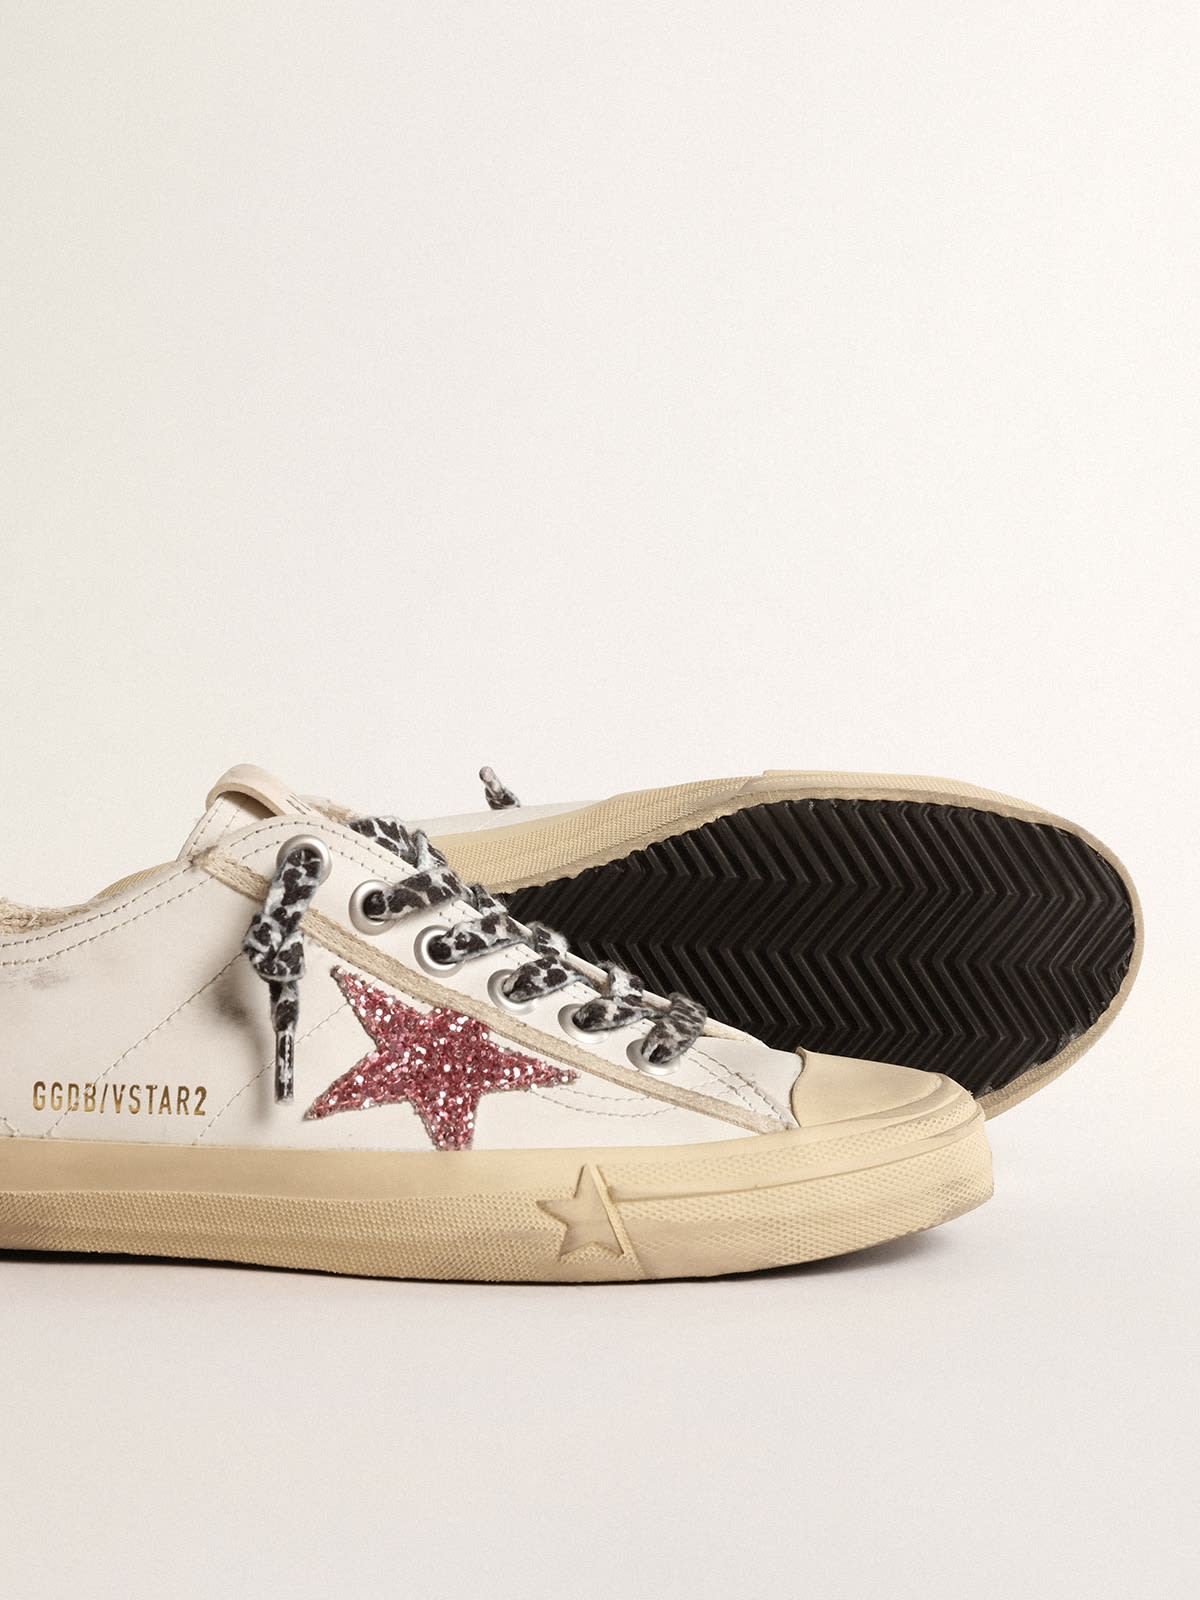 V-Star with pink glitter star and metallic leather heel tab - 4